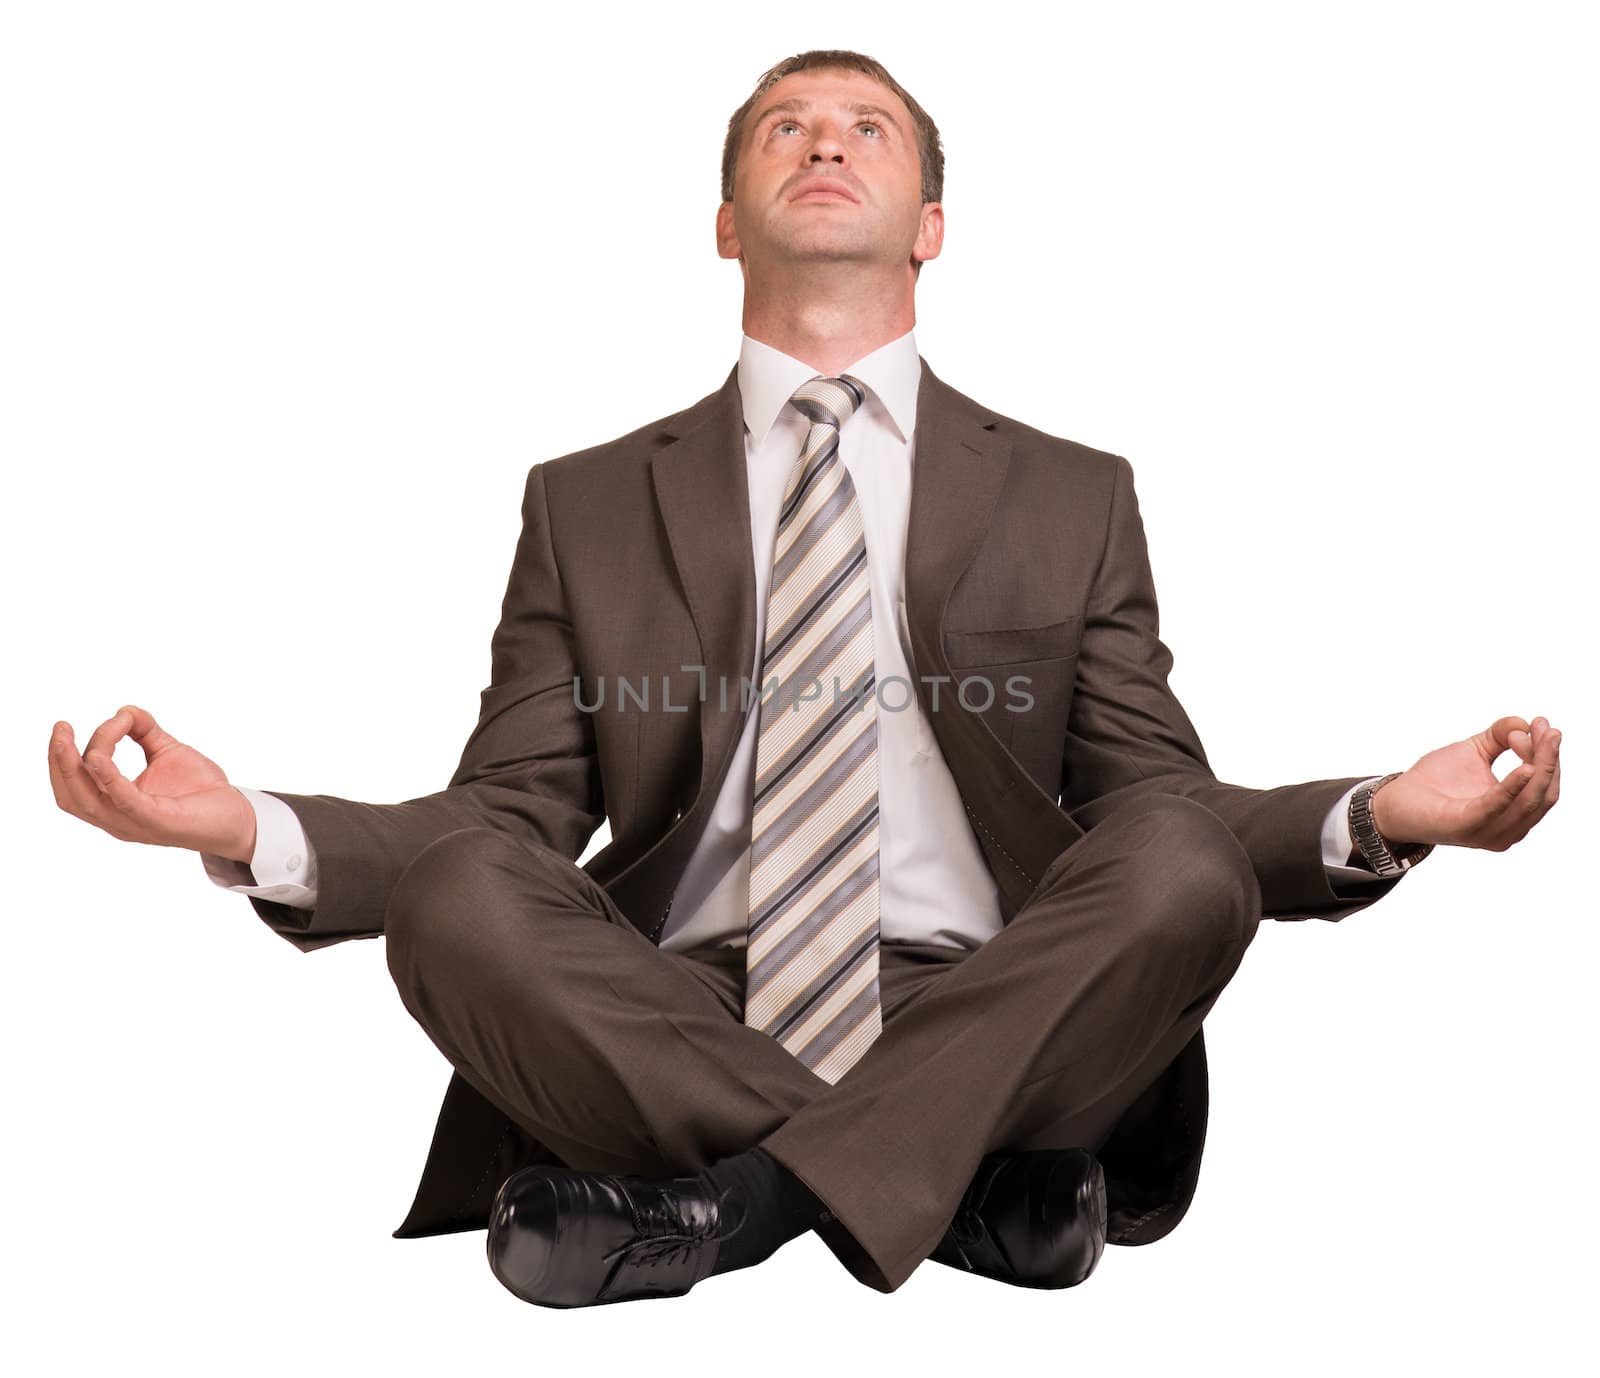 Businessman sitting in lotus position. Isolated on white background